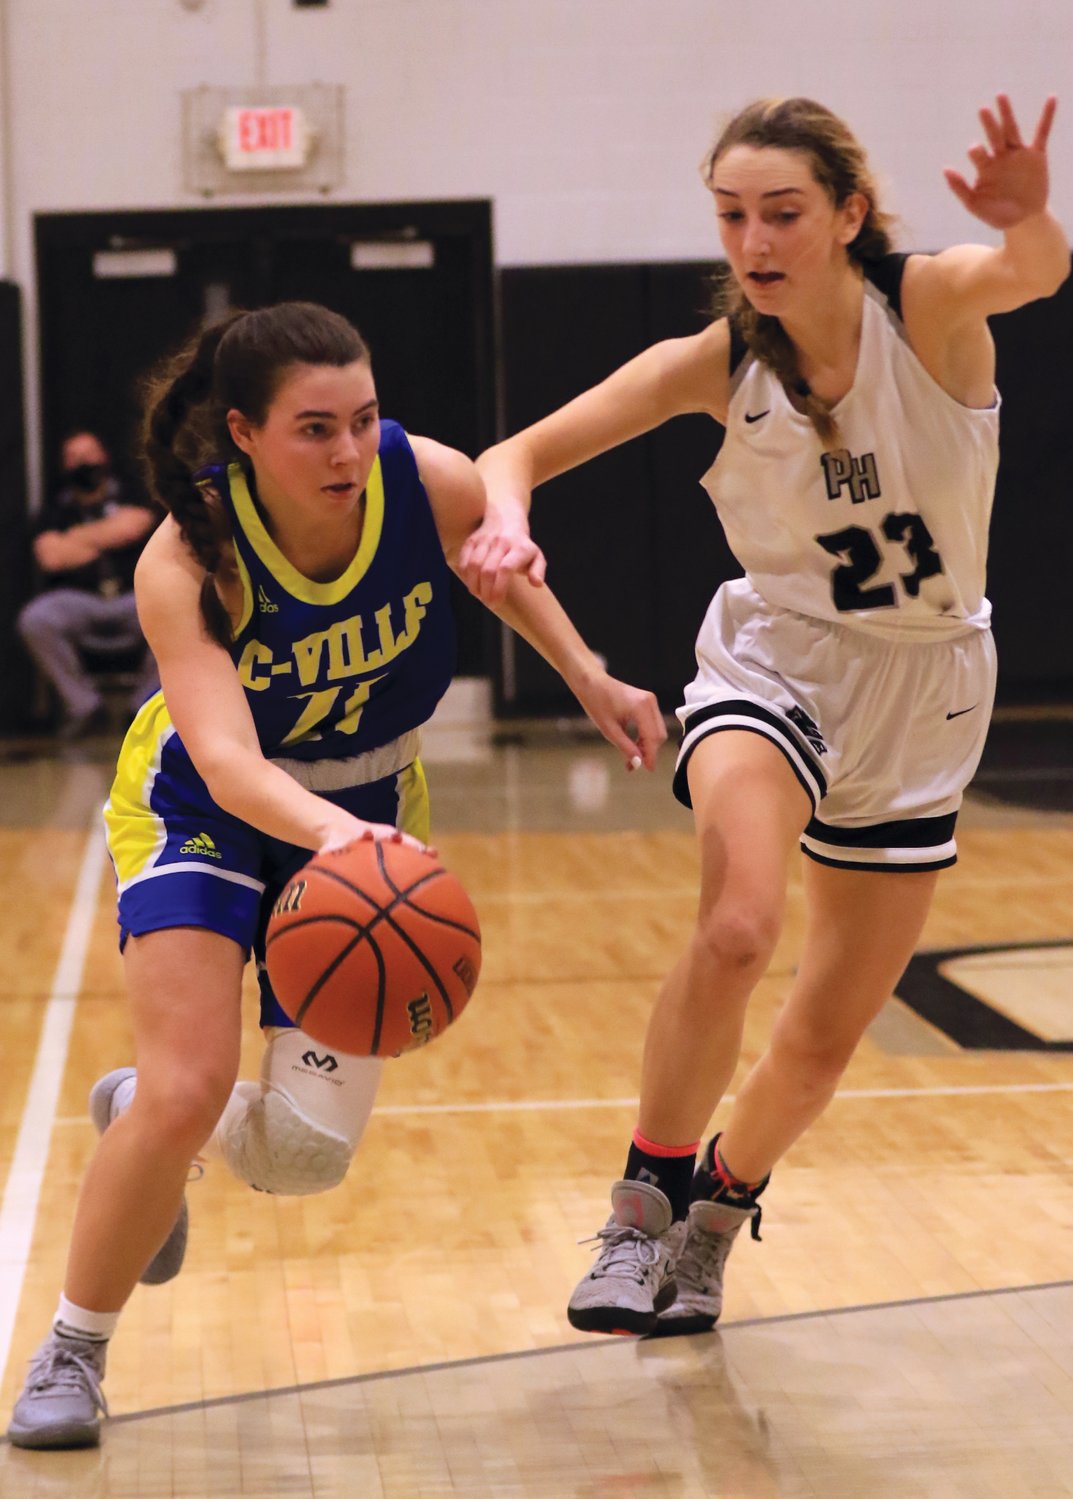 Crawfordsville's Liddy McCarty drives to the hoop against Parke Heritage on Saturday. The junior had five points in a 44-37 loss for the Athenians.